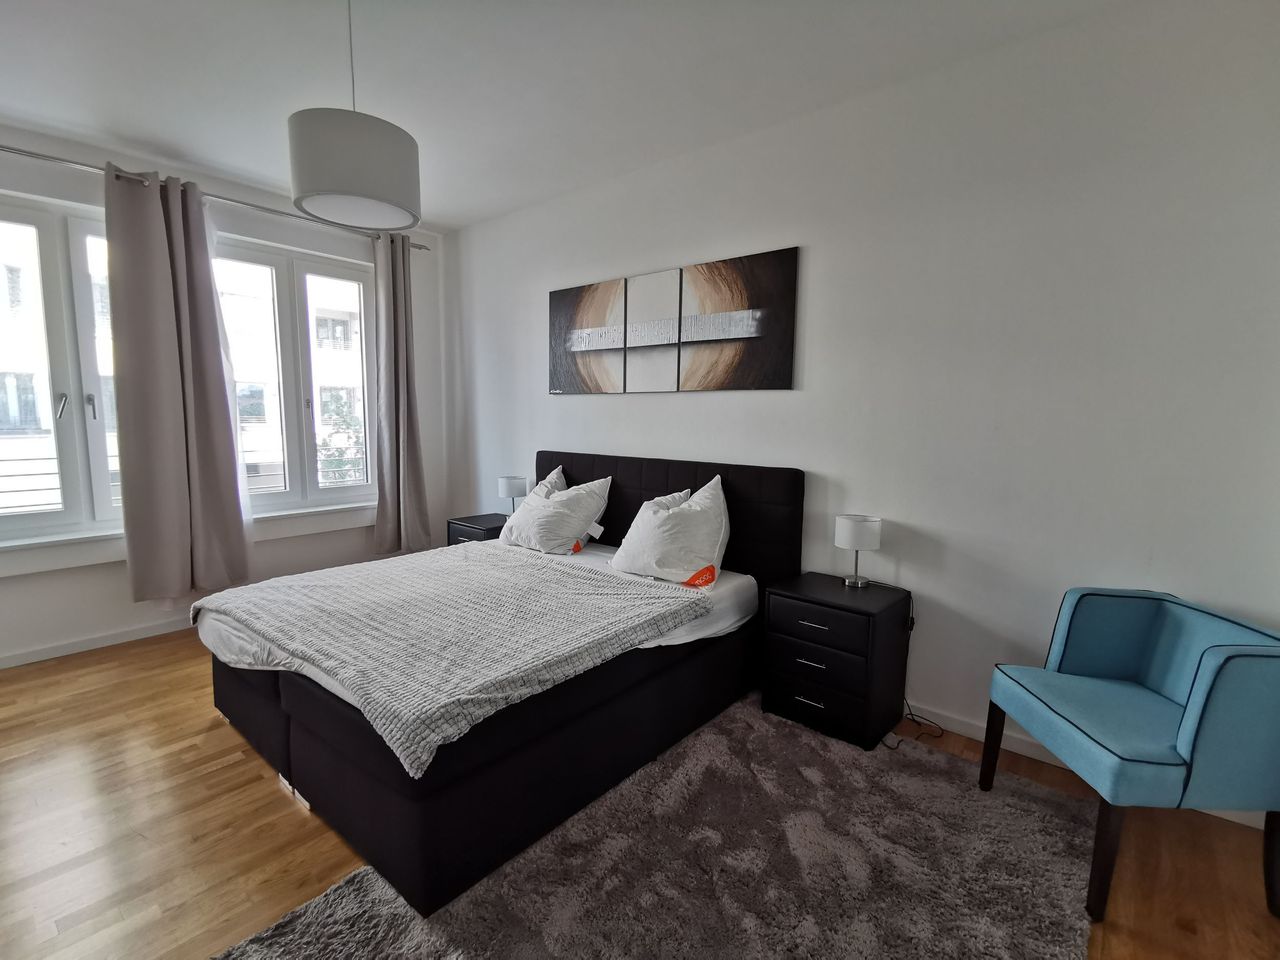 Exclusive apartment in the heart of Berlin - 24-hour concierge service at Highpark Potsdamer Platz